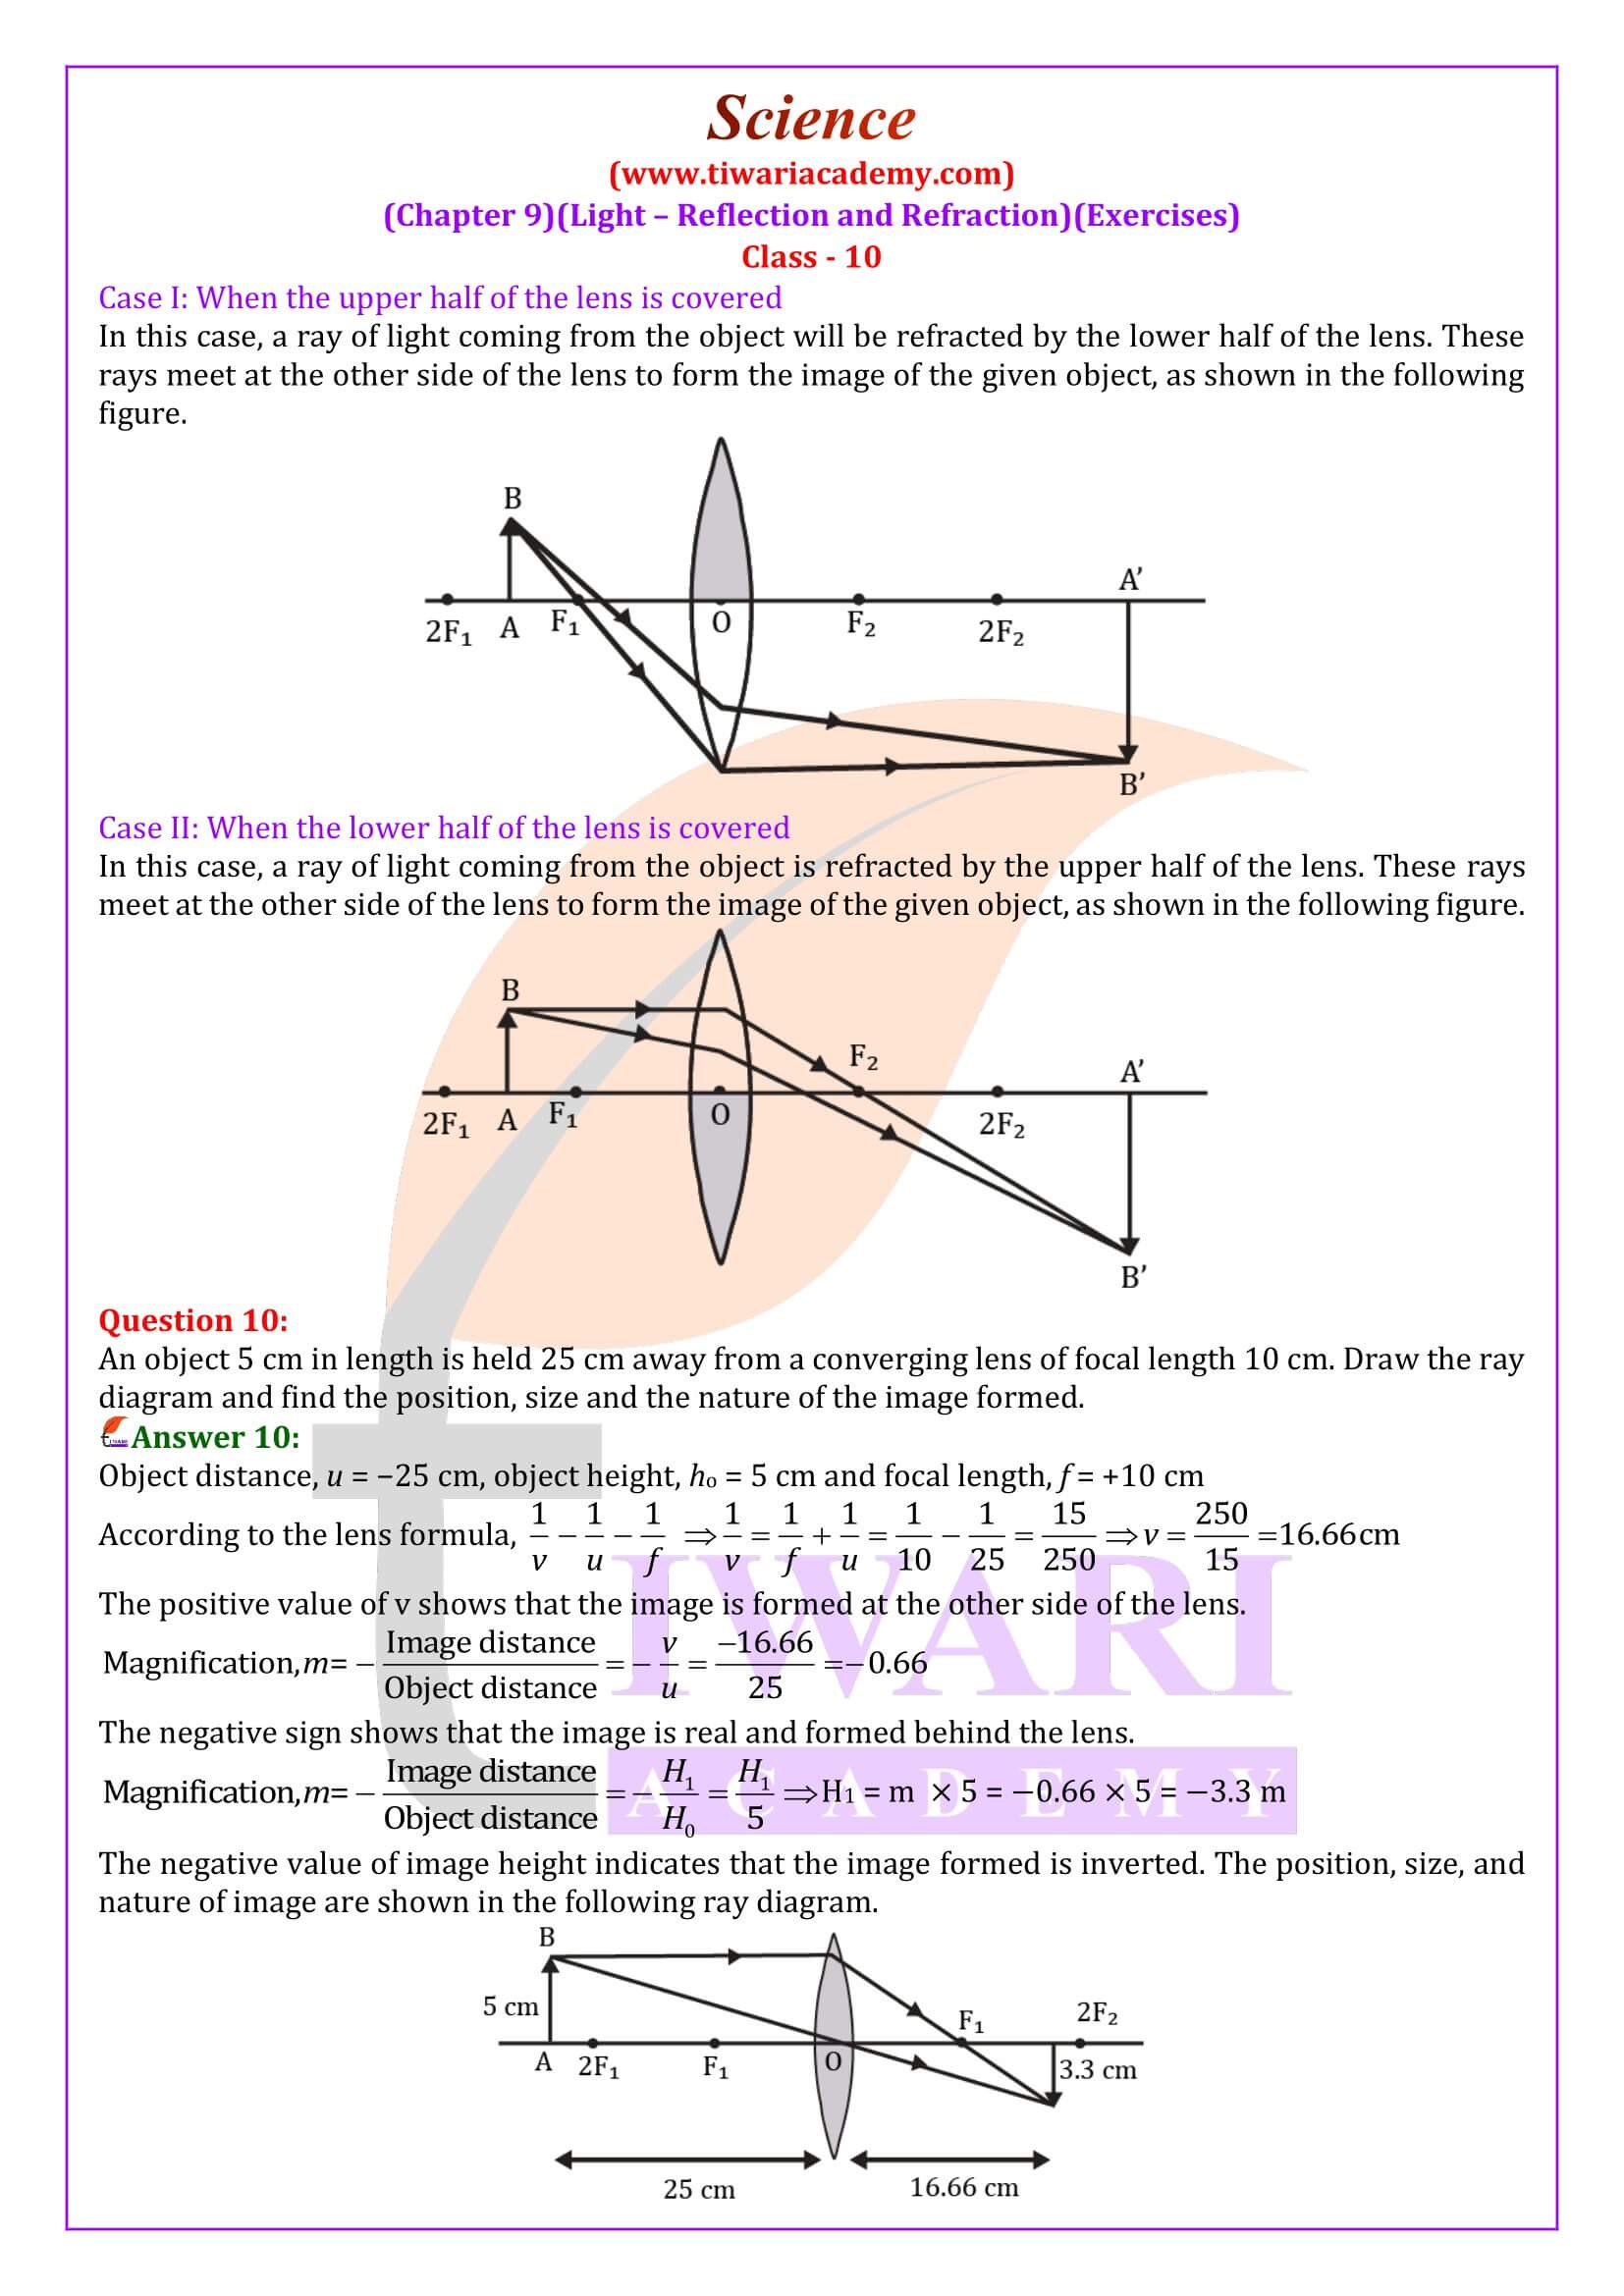 NCERT Solutions for Class 10 Science Chapter 9 Exercises